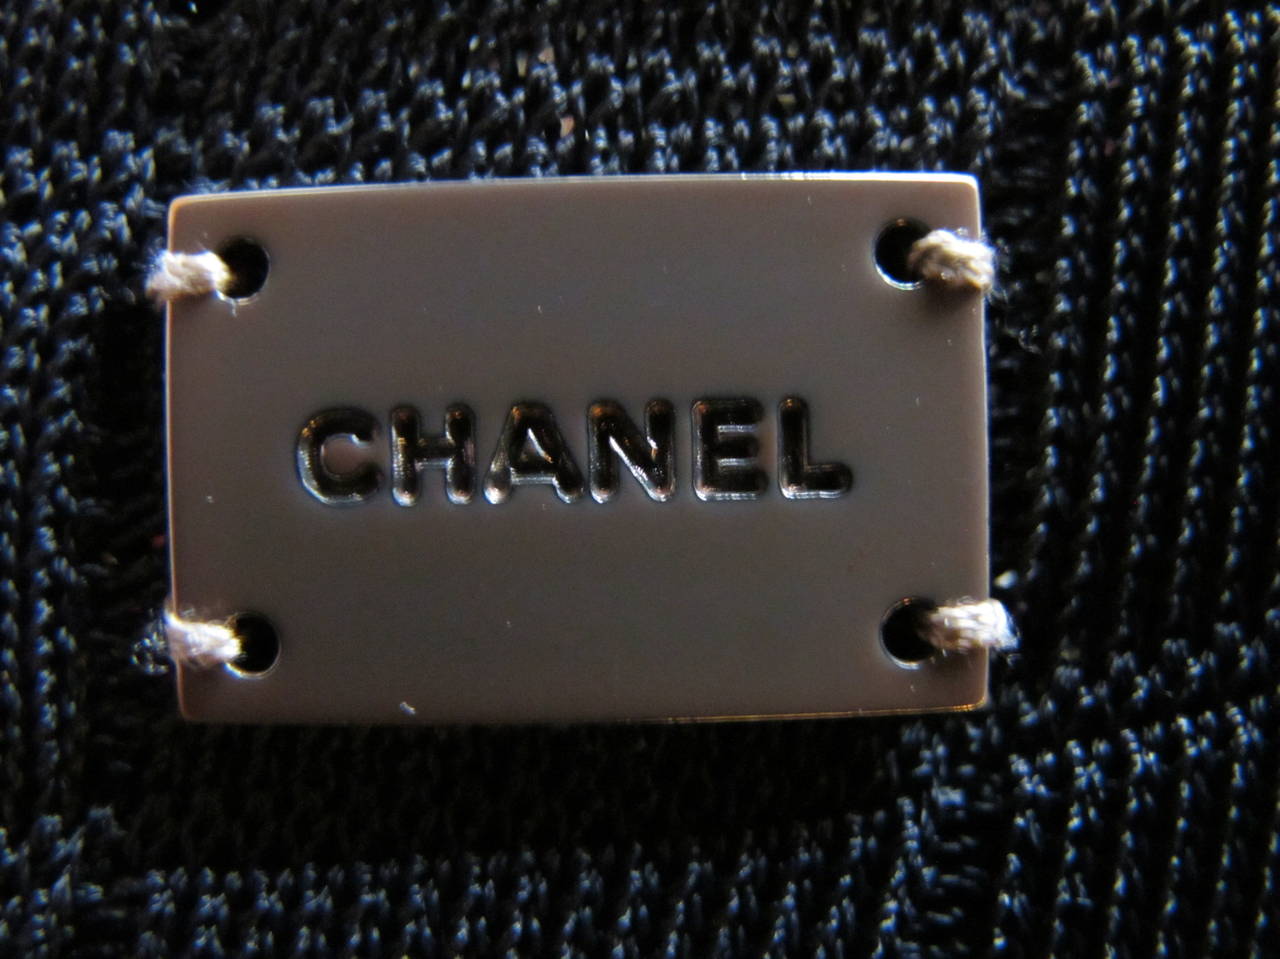 Chanel Black Knit Skirt with Chanel Logo For Sale 2